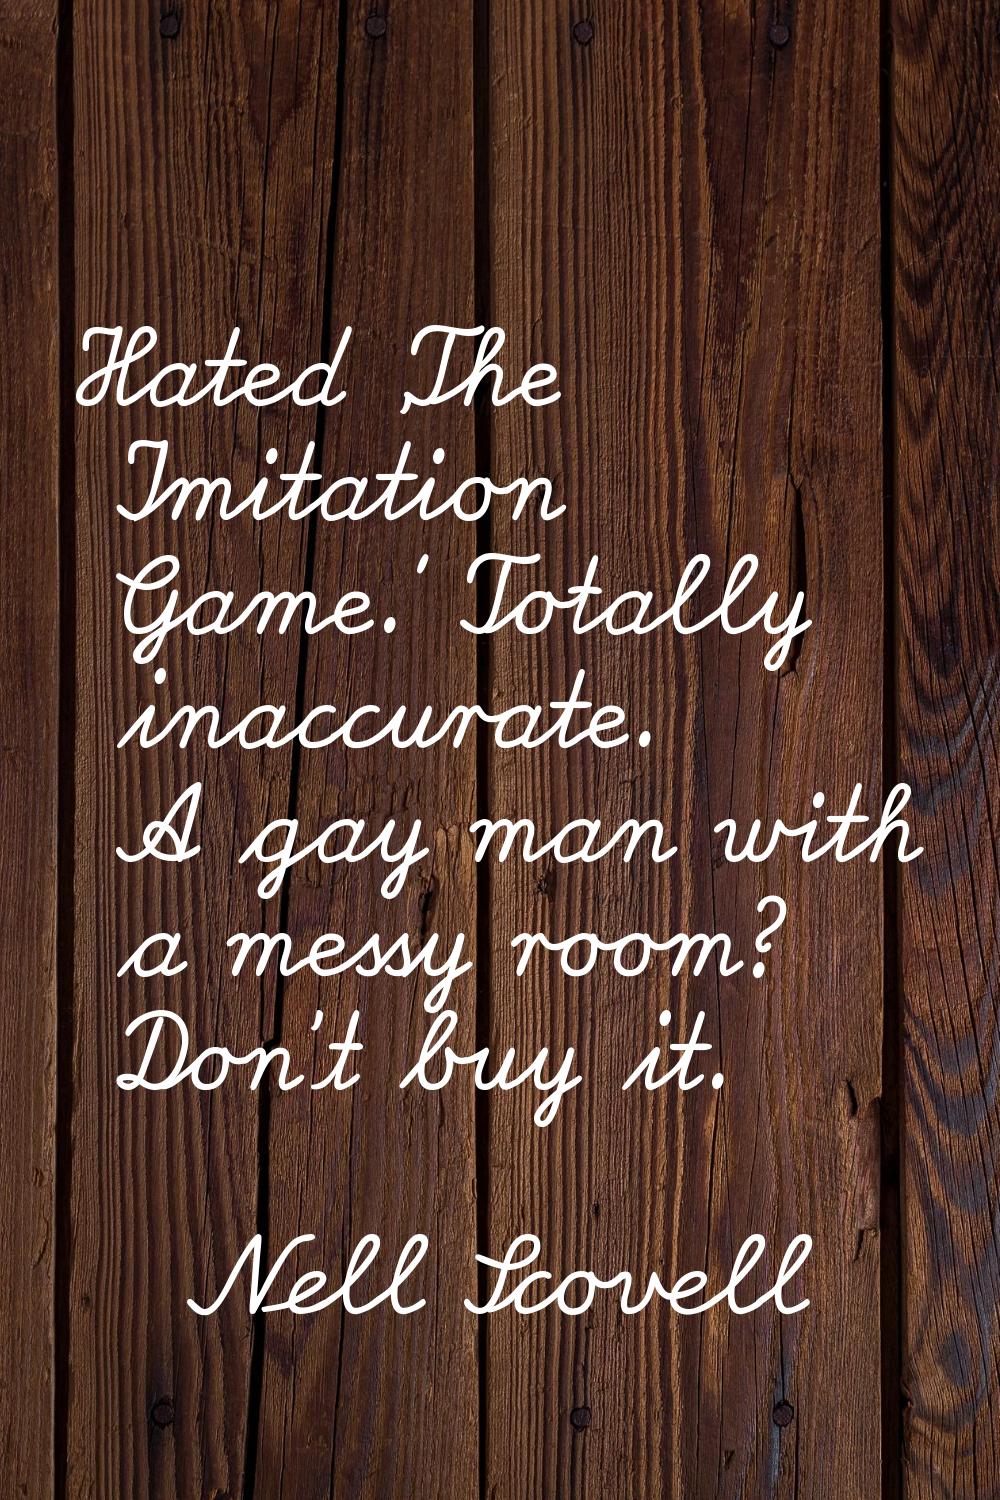 Hated 'The Imitation Game.' Totally inaccurate. A gay man with a messy room? Don't buy it.